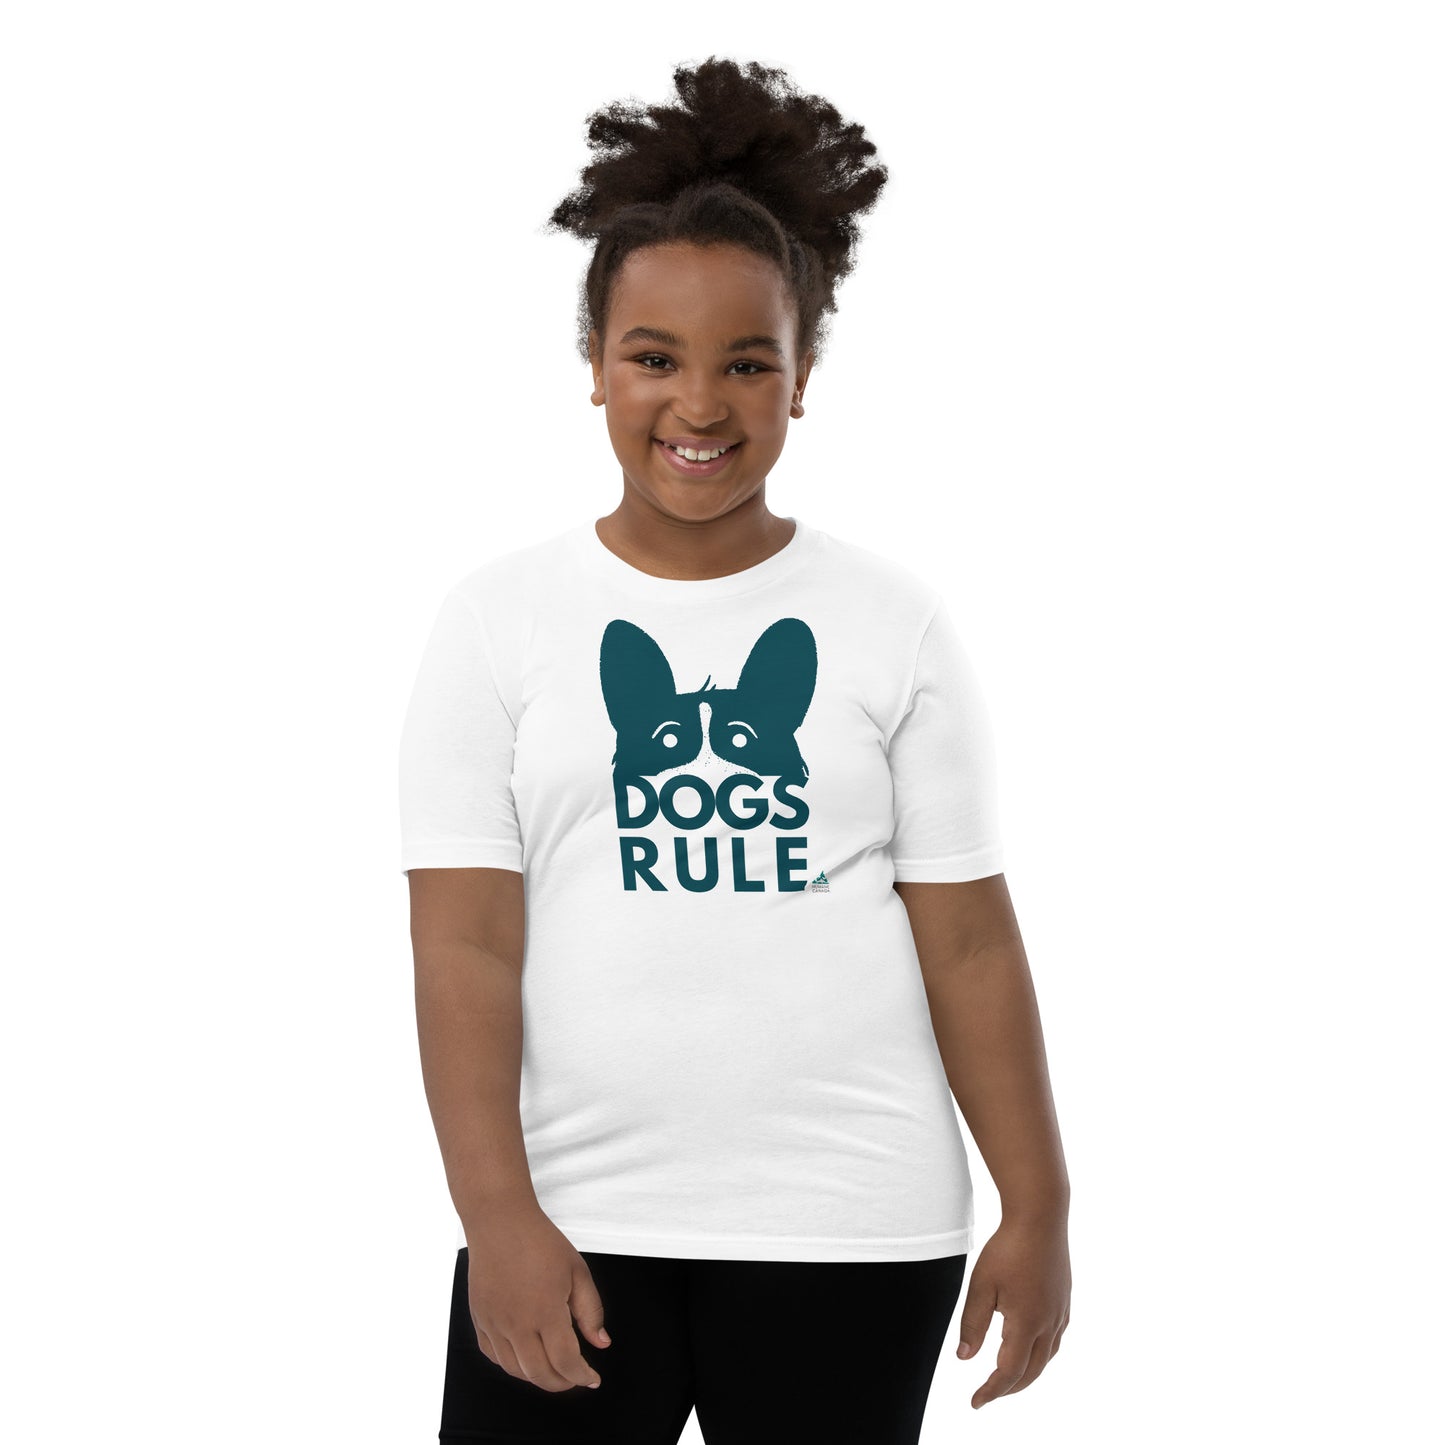 Dogs Rule - Youth Short Sleeve T-Shirt